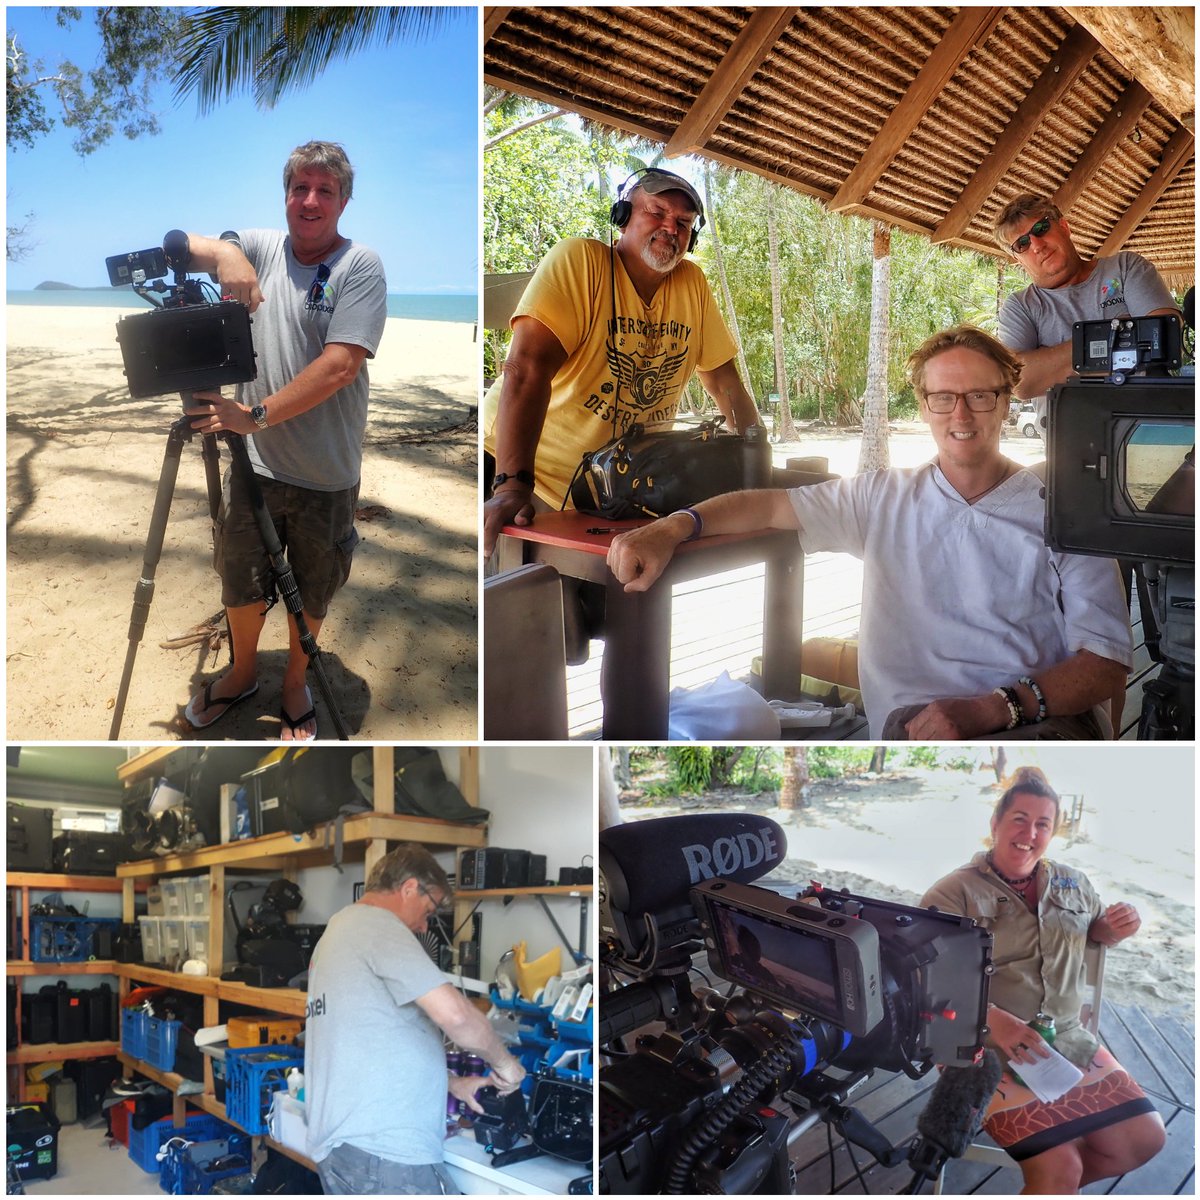 Thanks @BenEtosha1 @BrianLeithPro for including my work on #corals #bikiniatoll #climatechange in your exciting new series about the resilience of nature. Stoked to finally work with the legendary Richard Fitzpatrick @BiopixelTV. Bring on the September 2020 release!